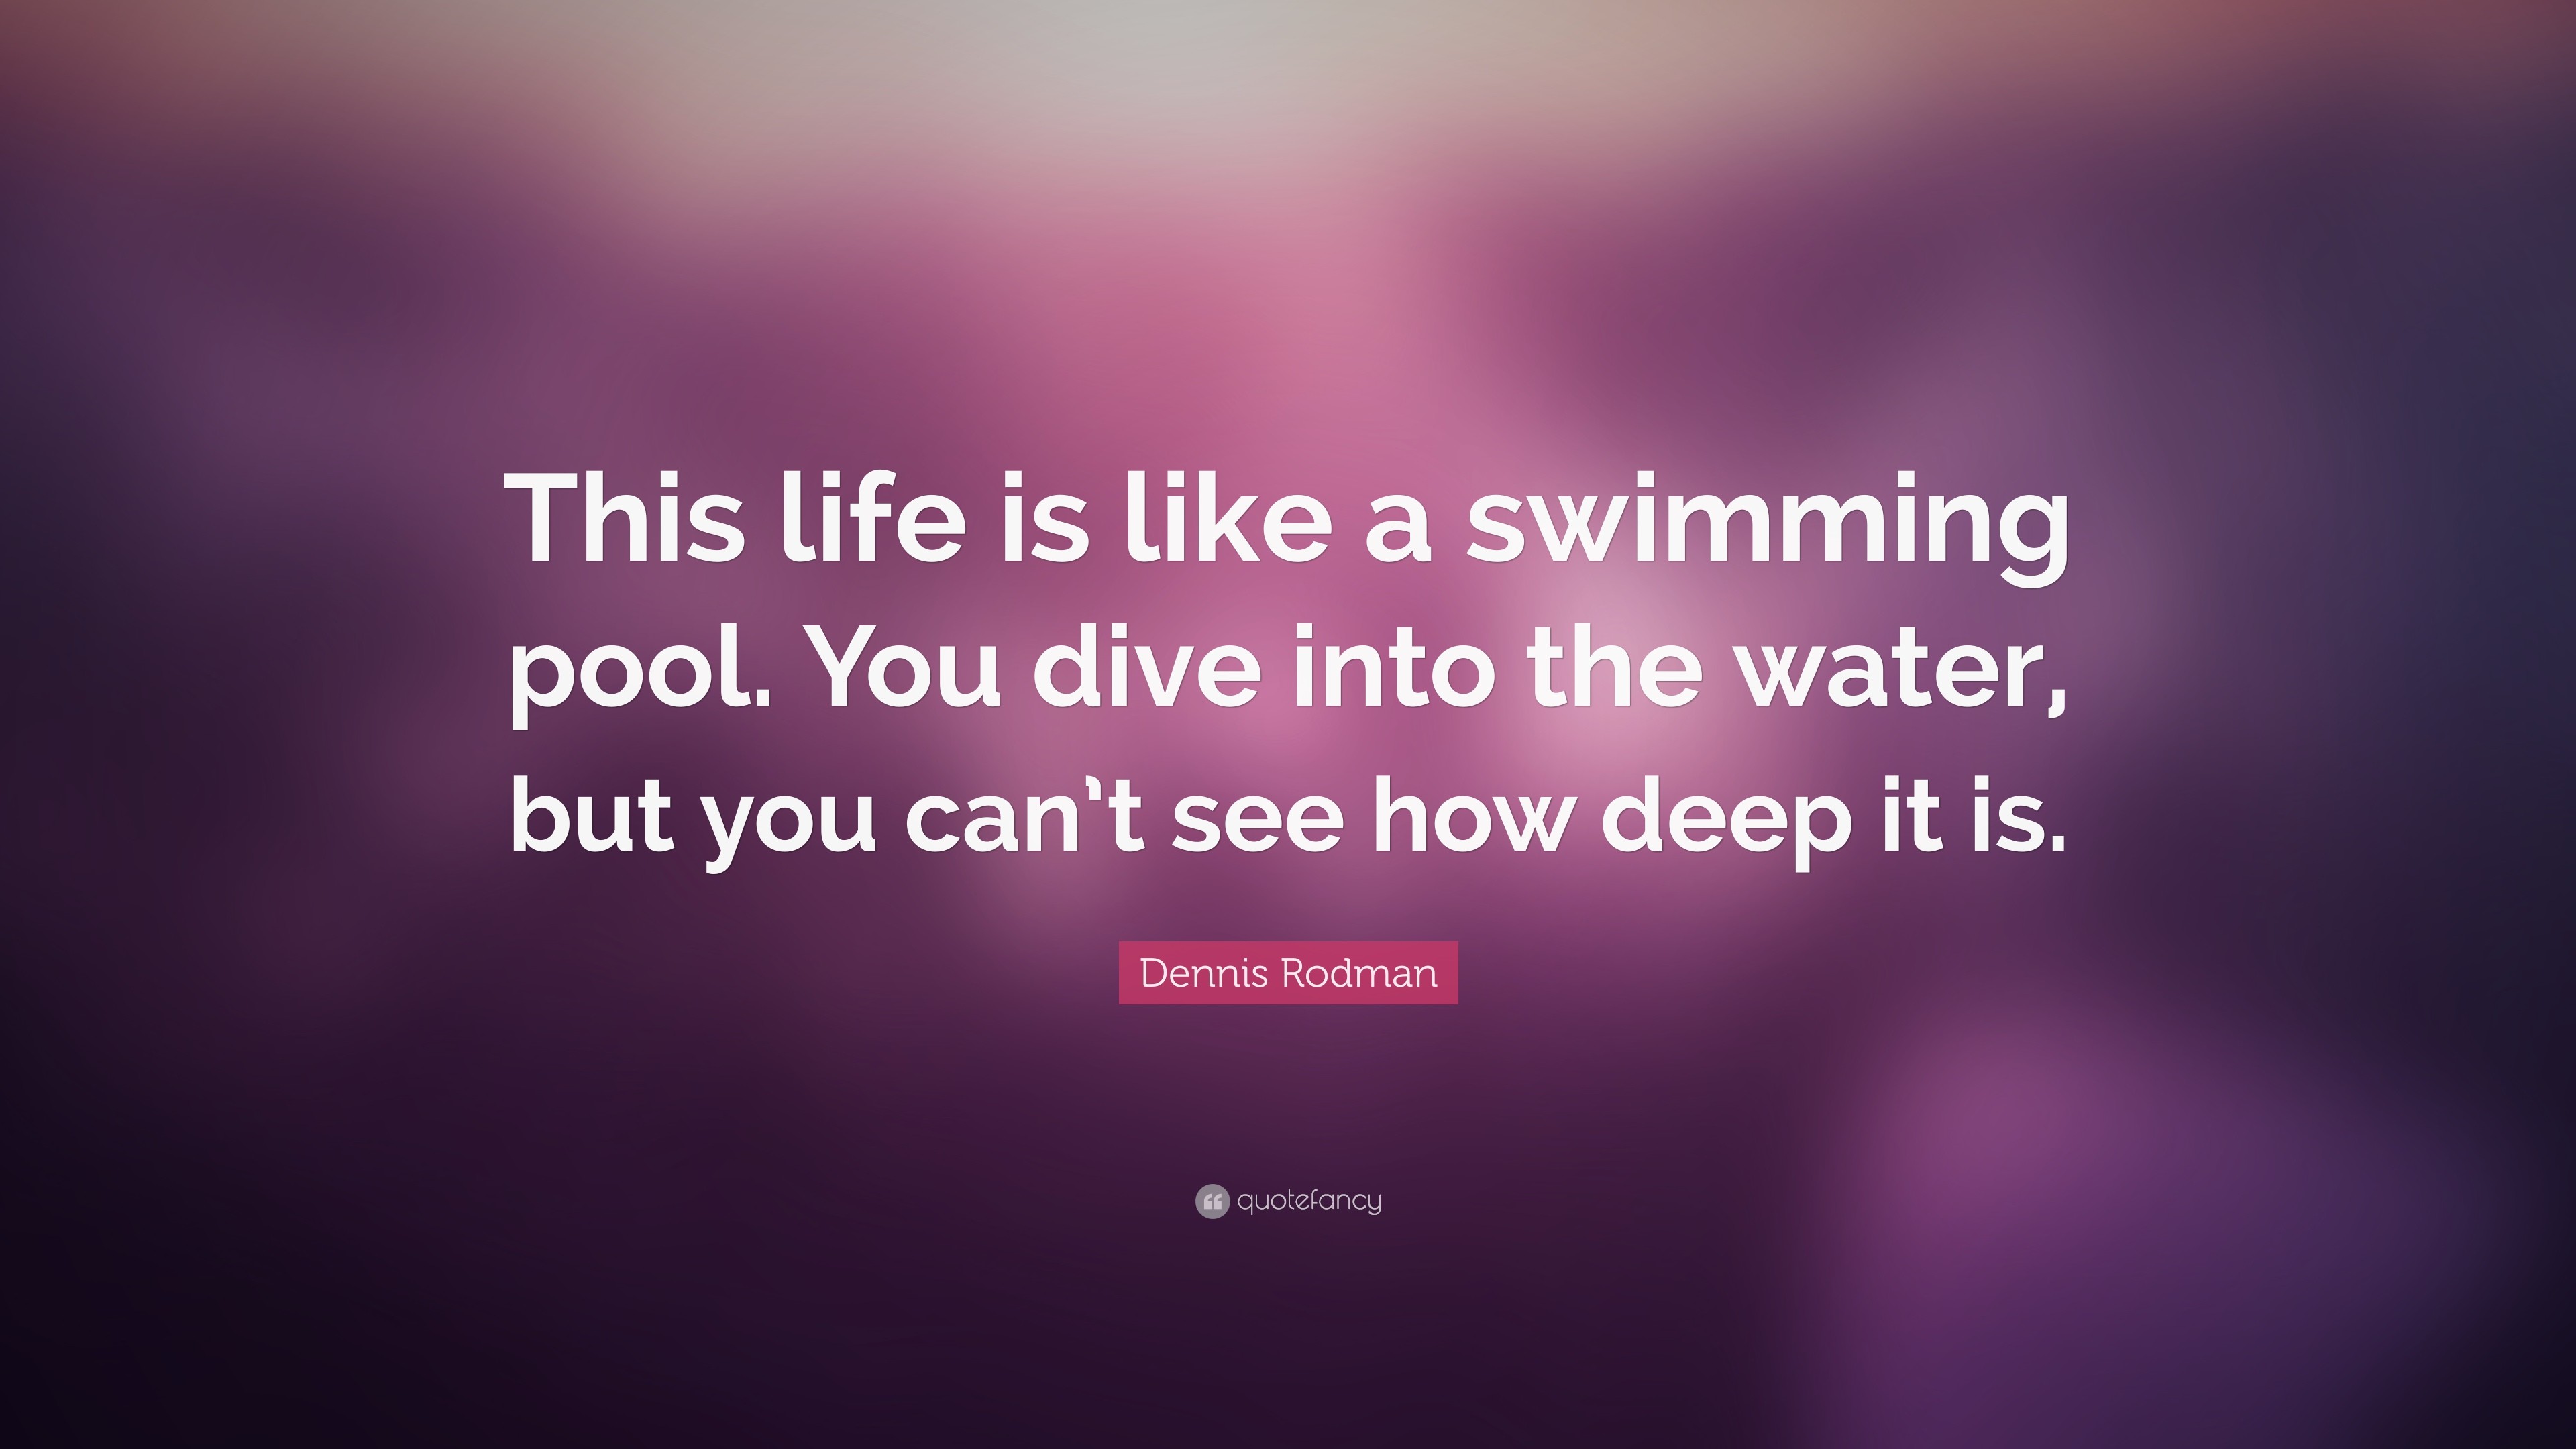 3840x2160 Dennis Rodman Quote: “This life is like a swimming pool. You dive into